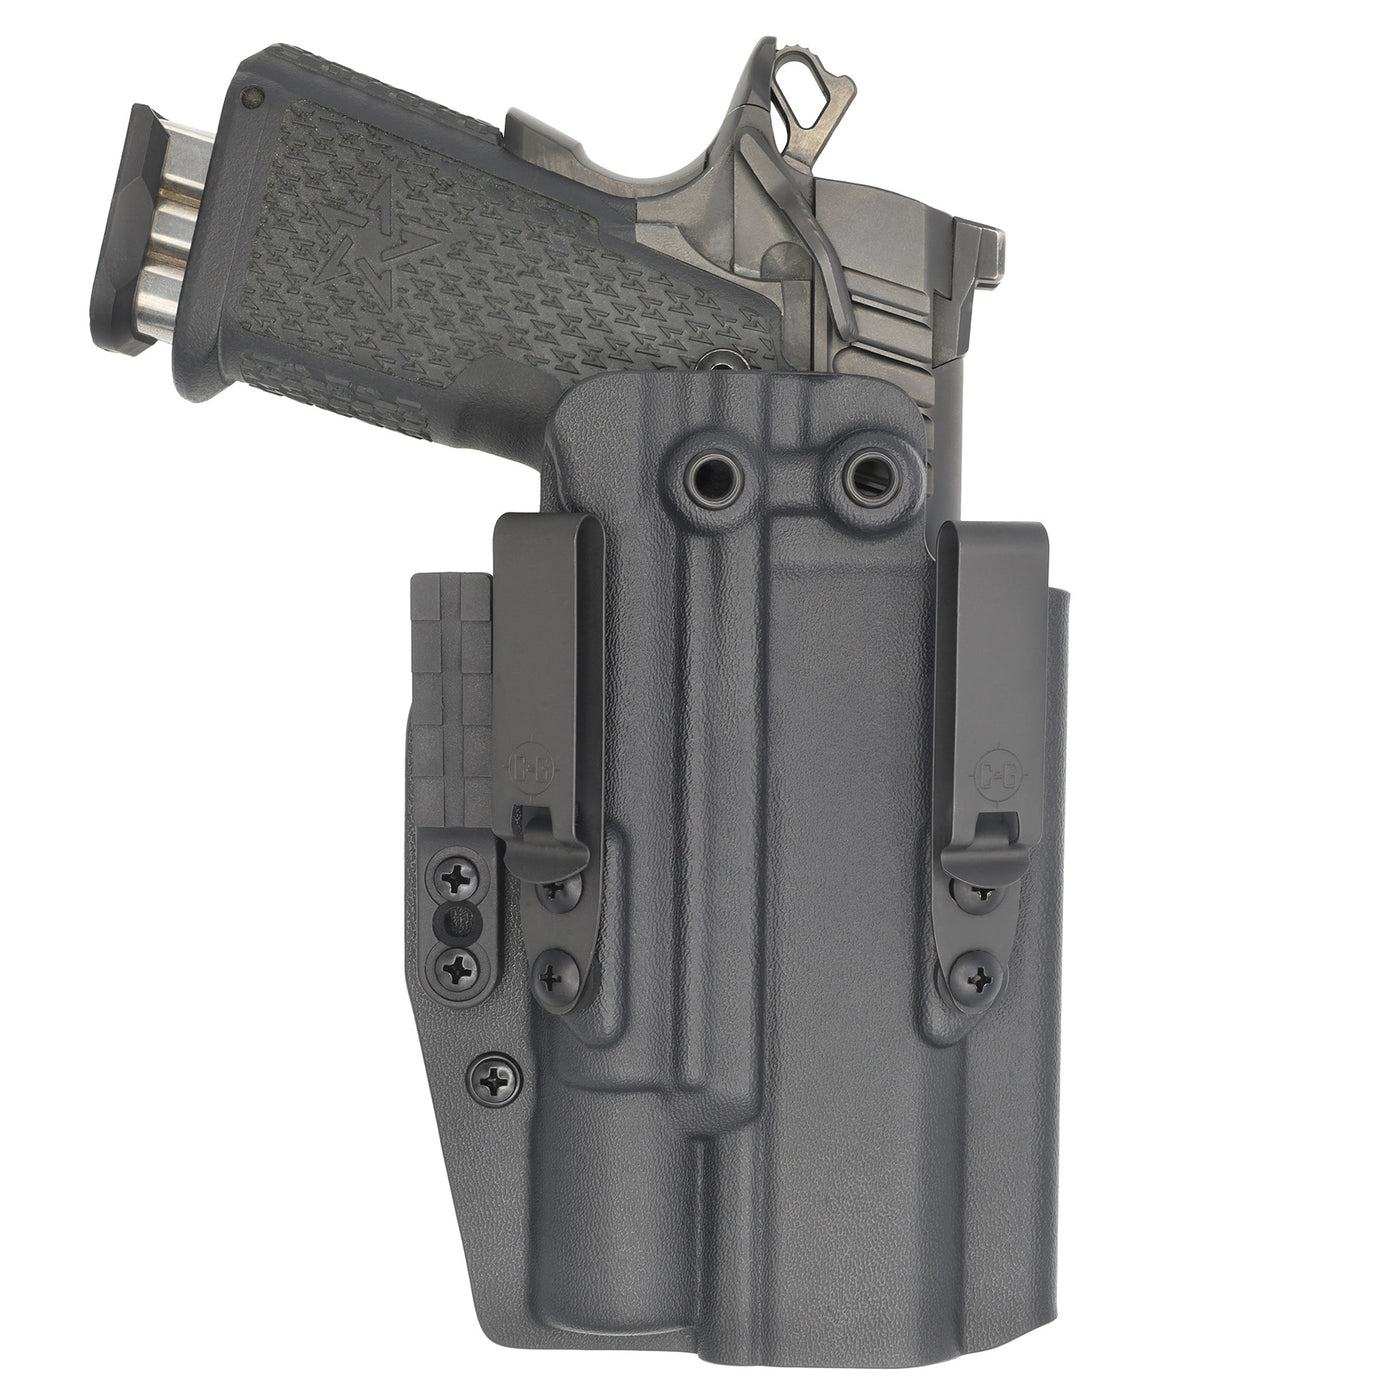 C&G Holsters custom IWB Tactical ALPHA UPGRADE 1911 Surefire X300 in holstered position